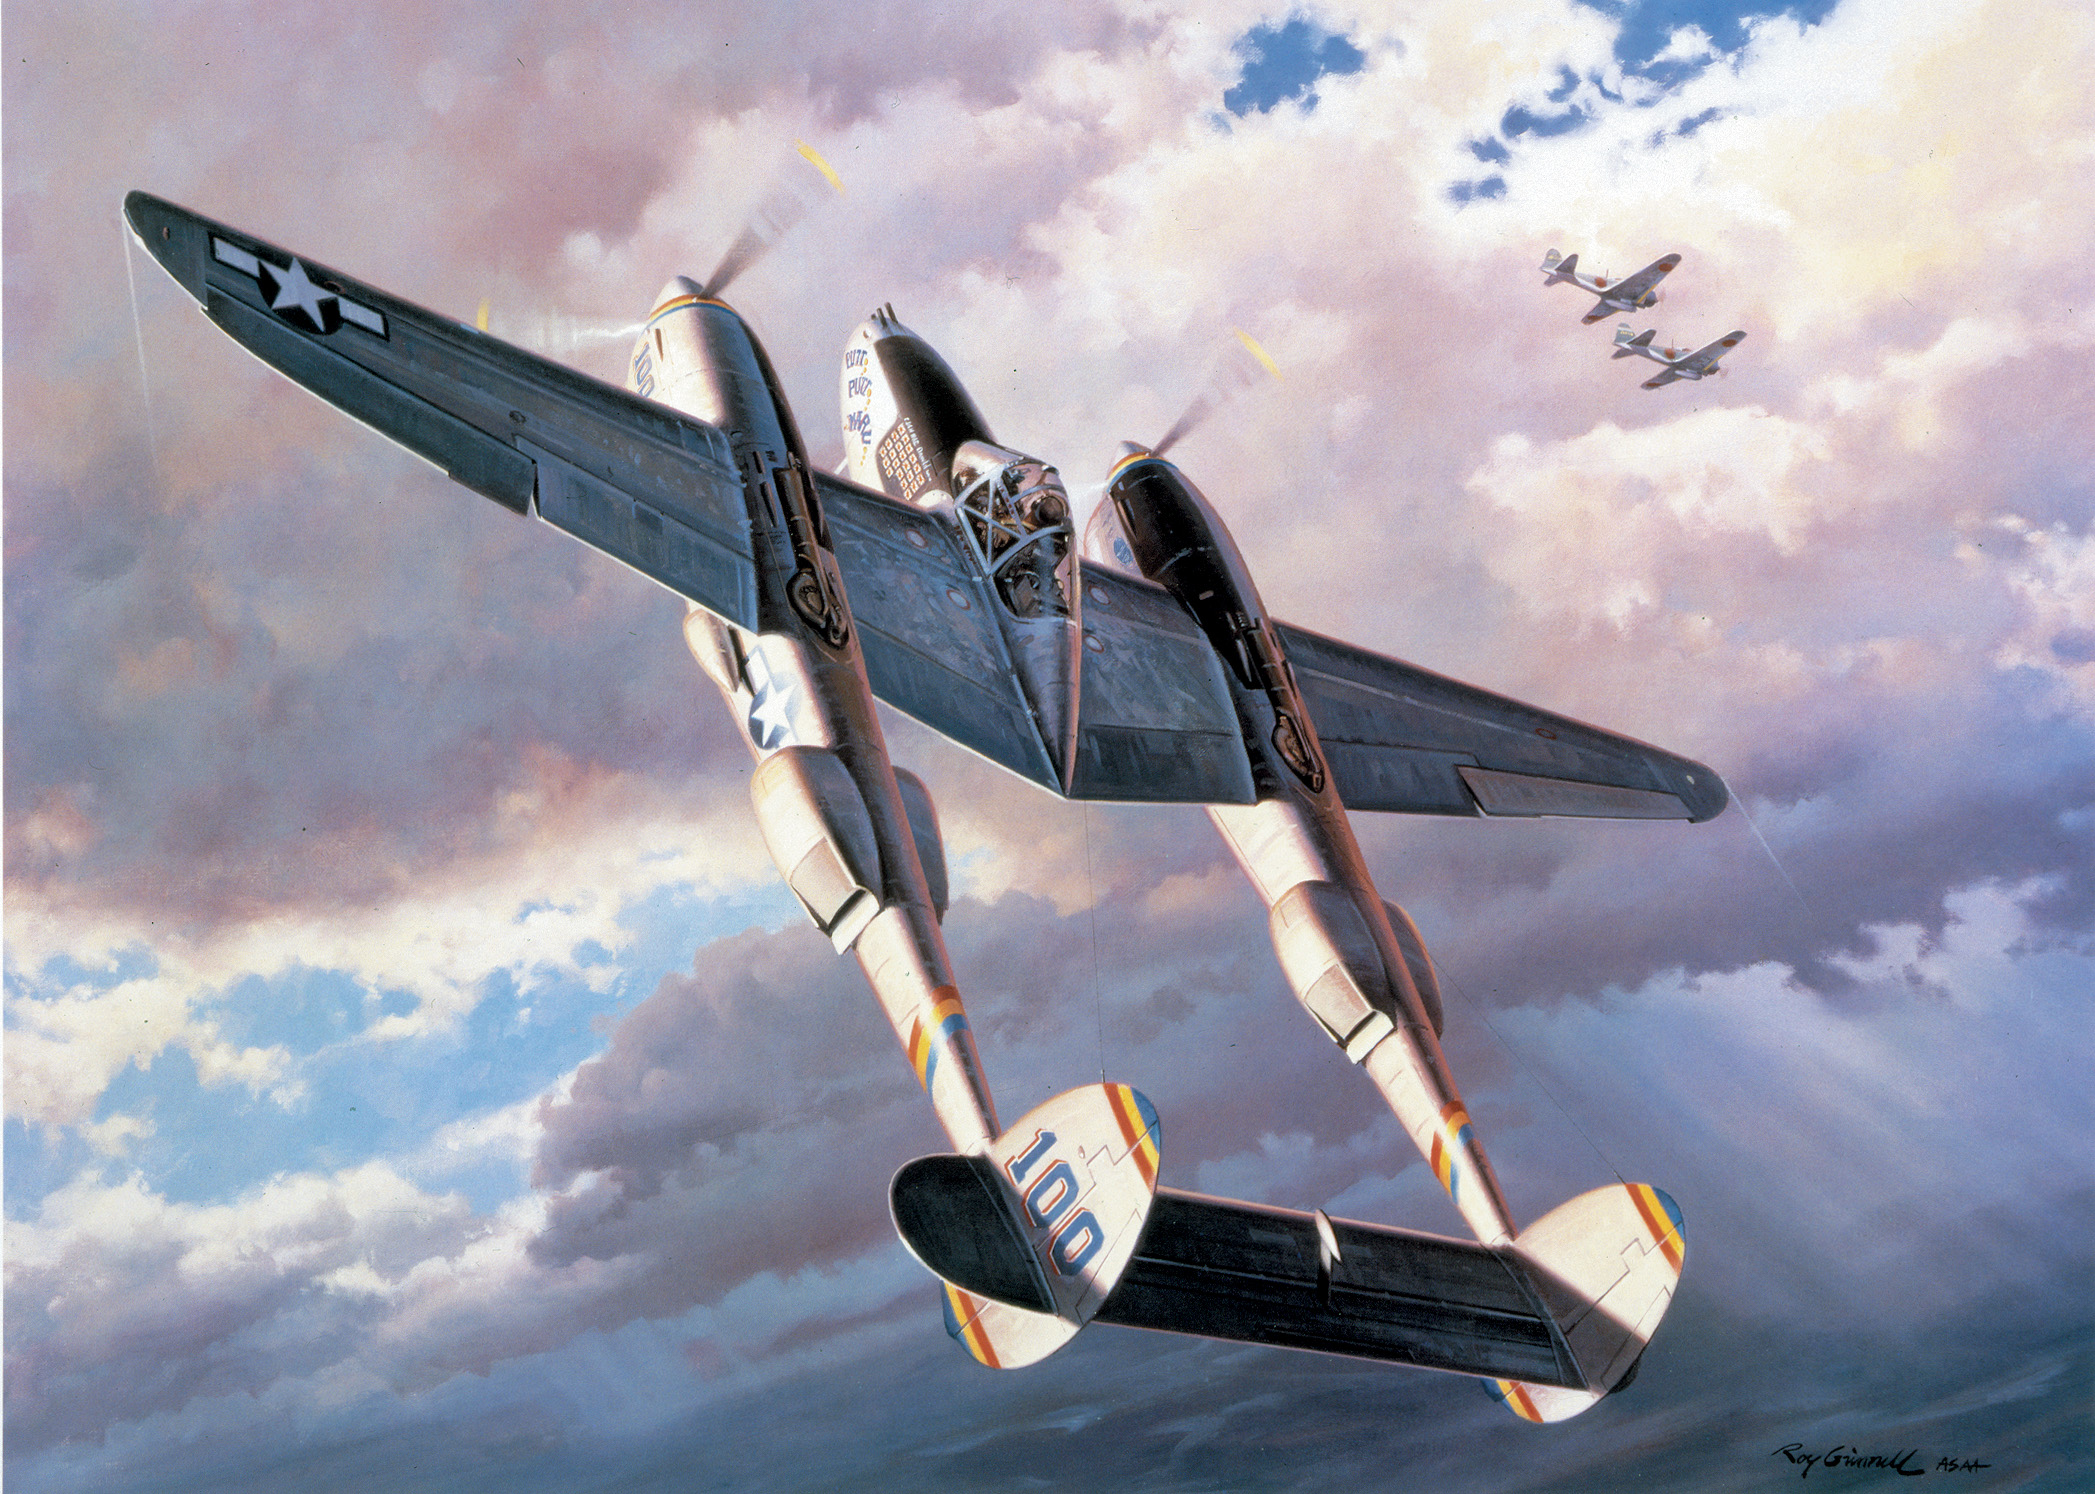 In Roy Grinnell’s “Danger Lightning” a Lockheed P-38 fighter gains altitude to confront high-flying Japanese aircraft. The Lightning was the first Allied fighter to seriously challenge Japanese domination of the skies in the Pacific.